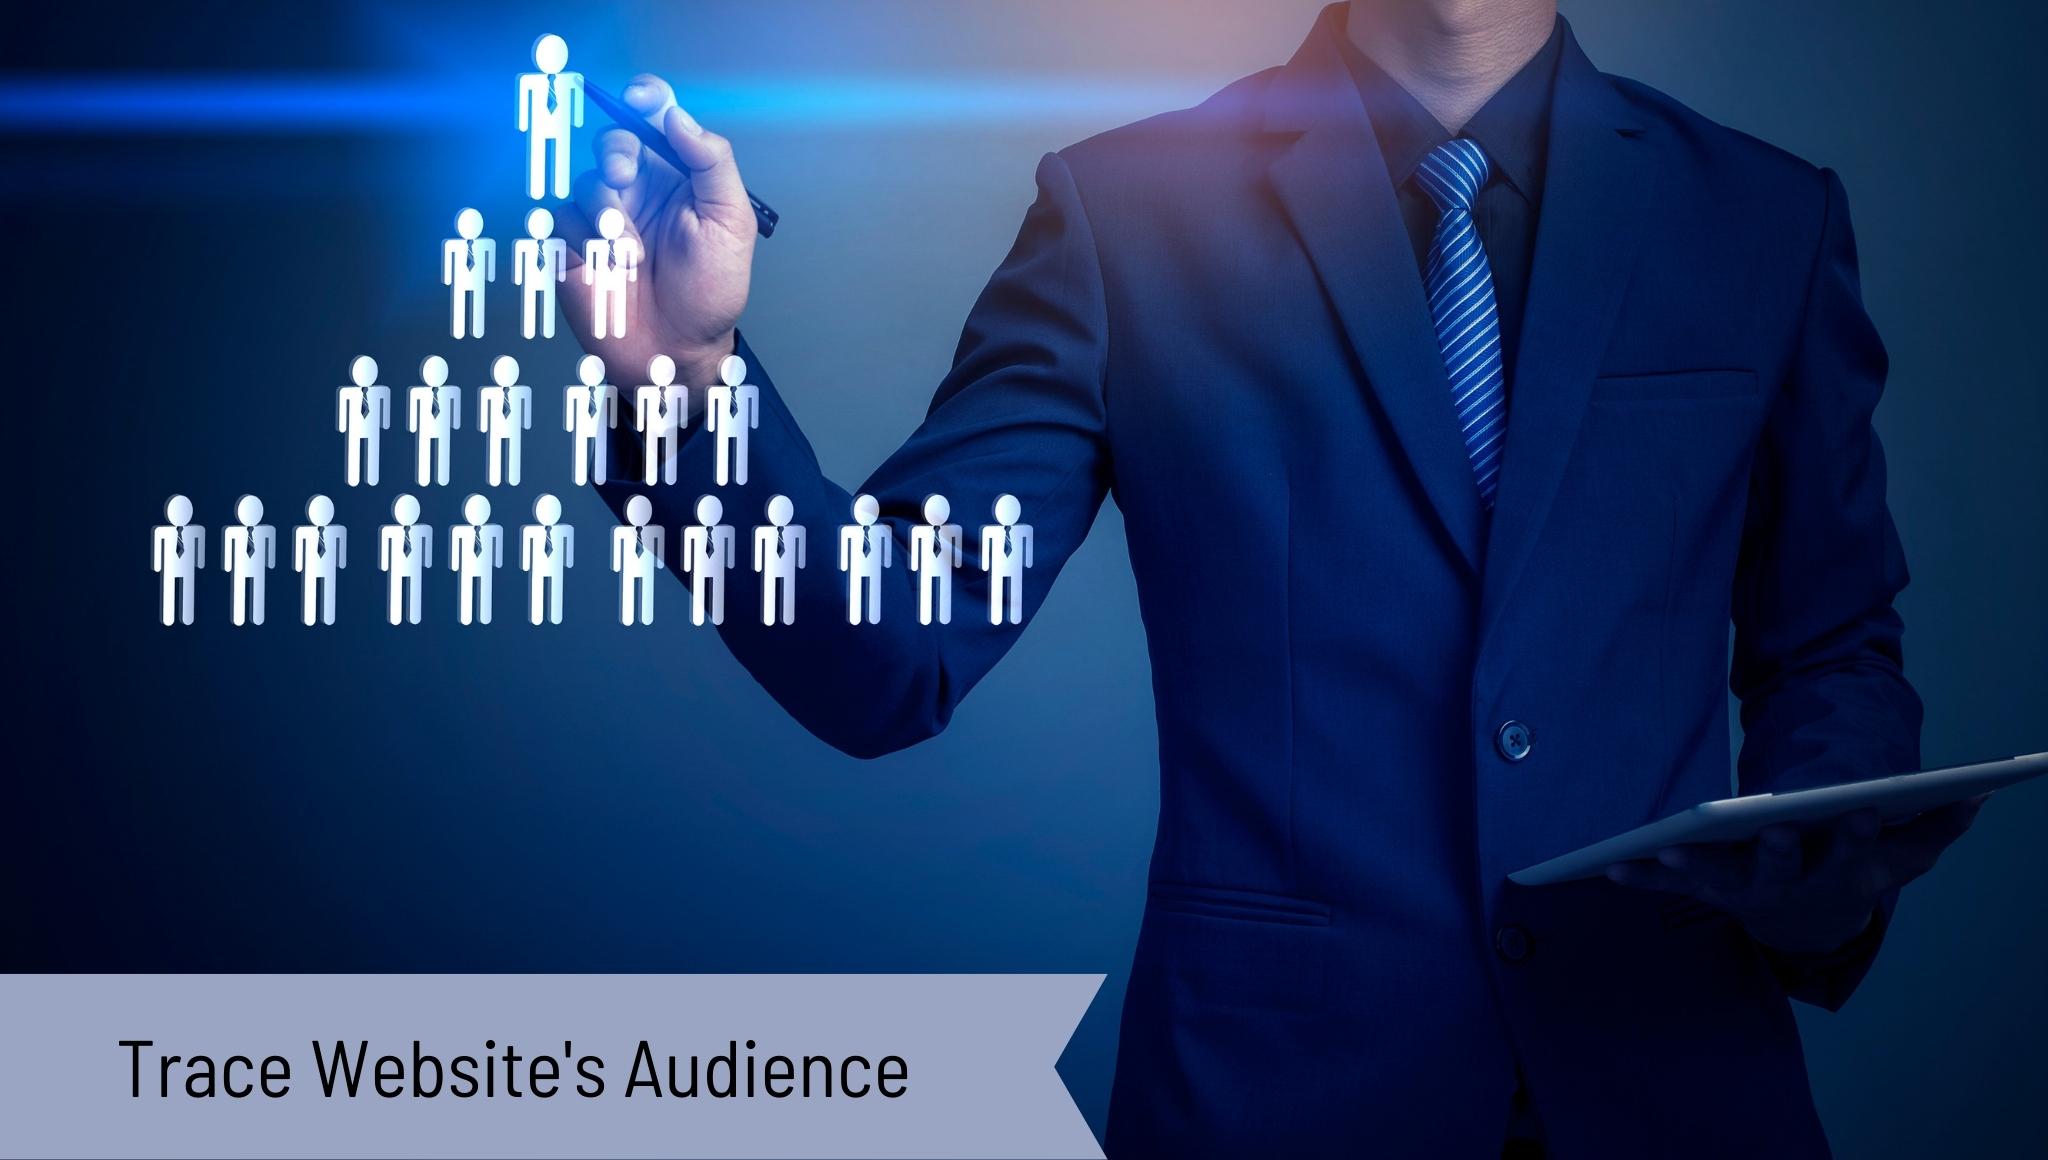 Trace your website’s audience